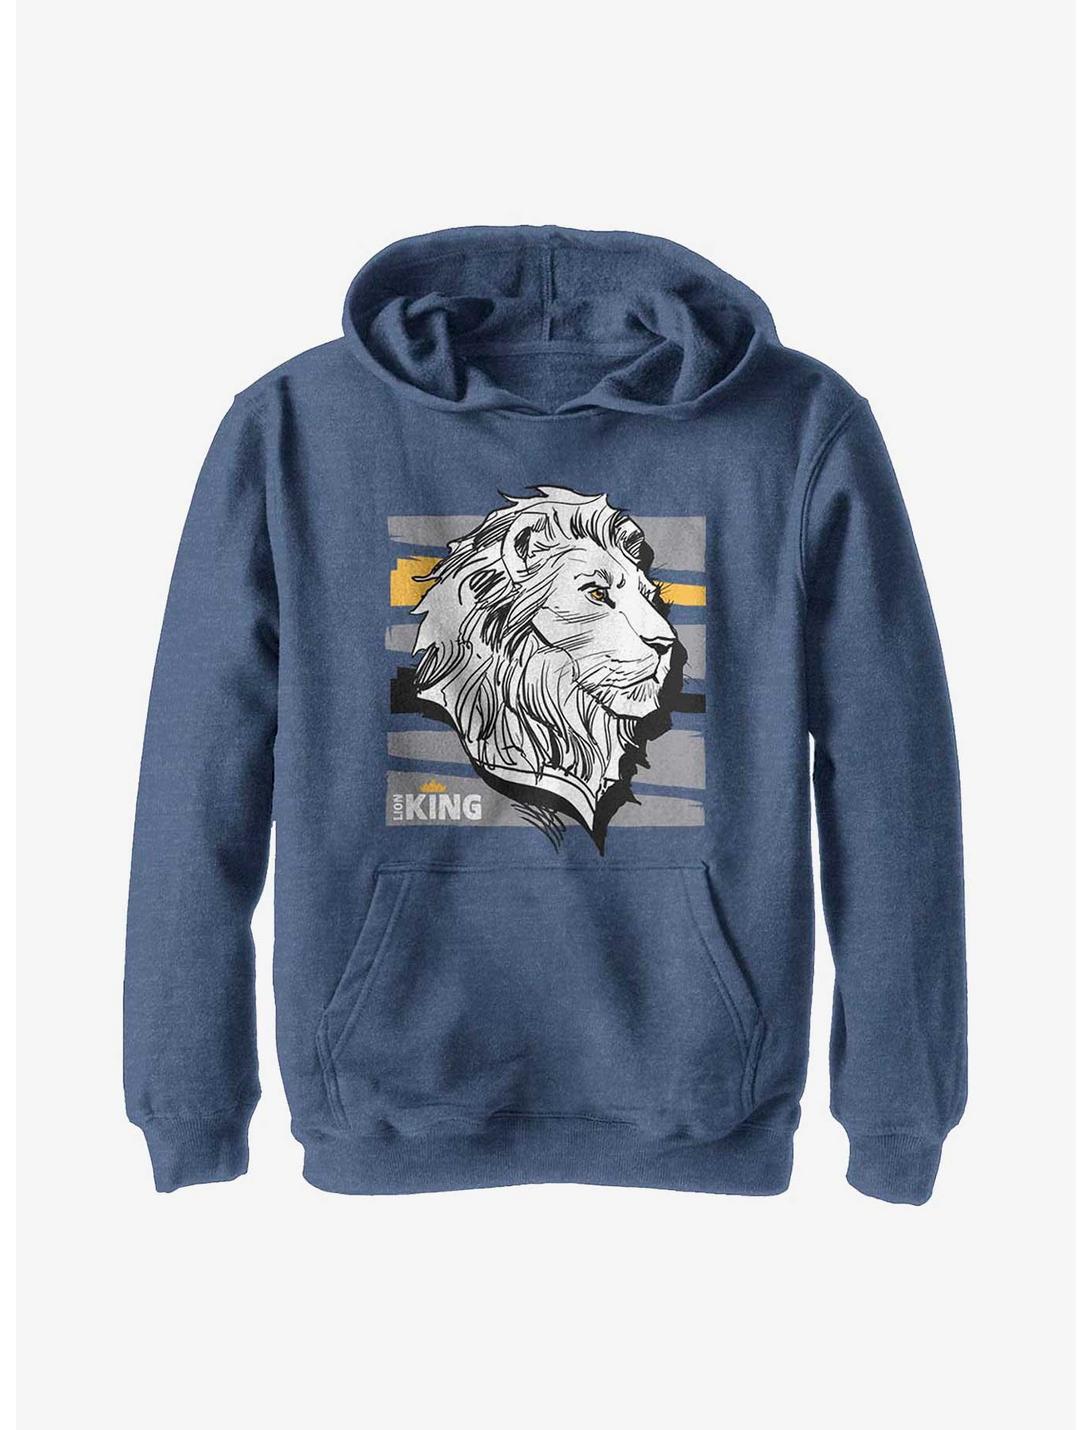 Disney The Lion King 2019 King Youth Hoodie, NAVY HTR, hi-res